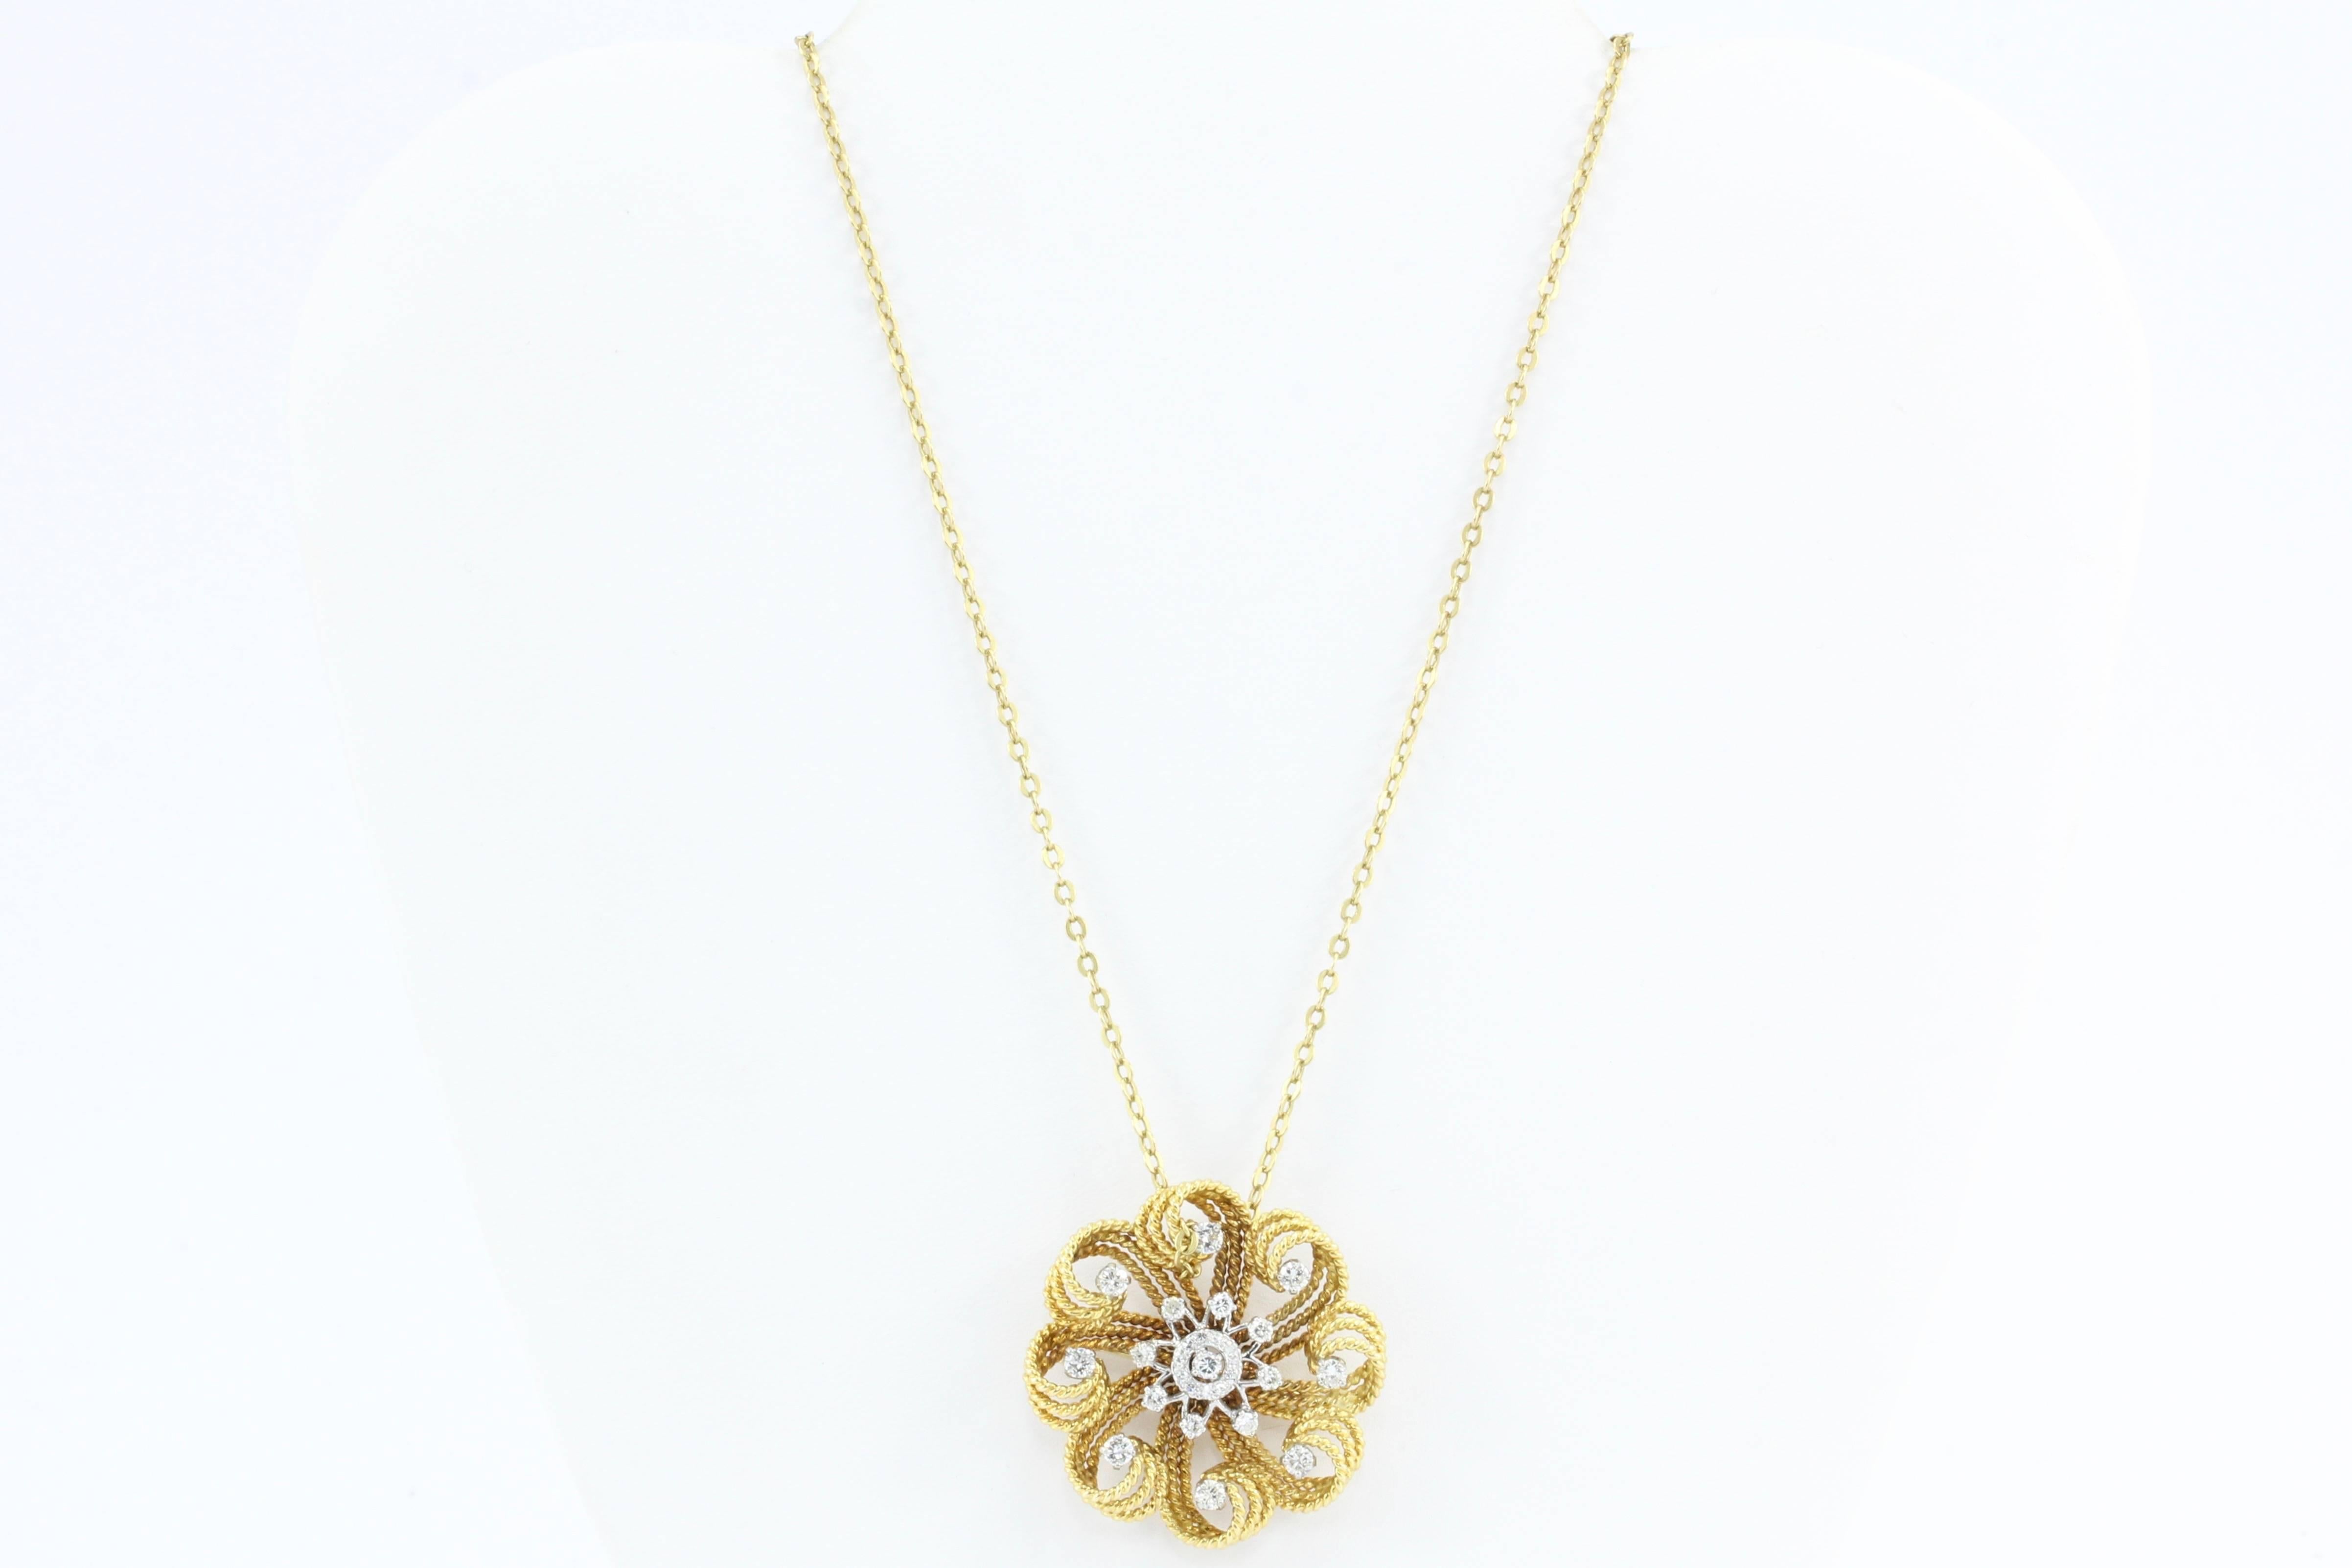 Retro 18K Gold Diamond Flower Swirl Pendant Necklace

Curling petals of twisted 18K yellow gold tipped with diamonds surround an 18K white gold and diamond center on this fabulous retro pendant / brooch. The piece can be worn as a pendant or as a